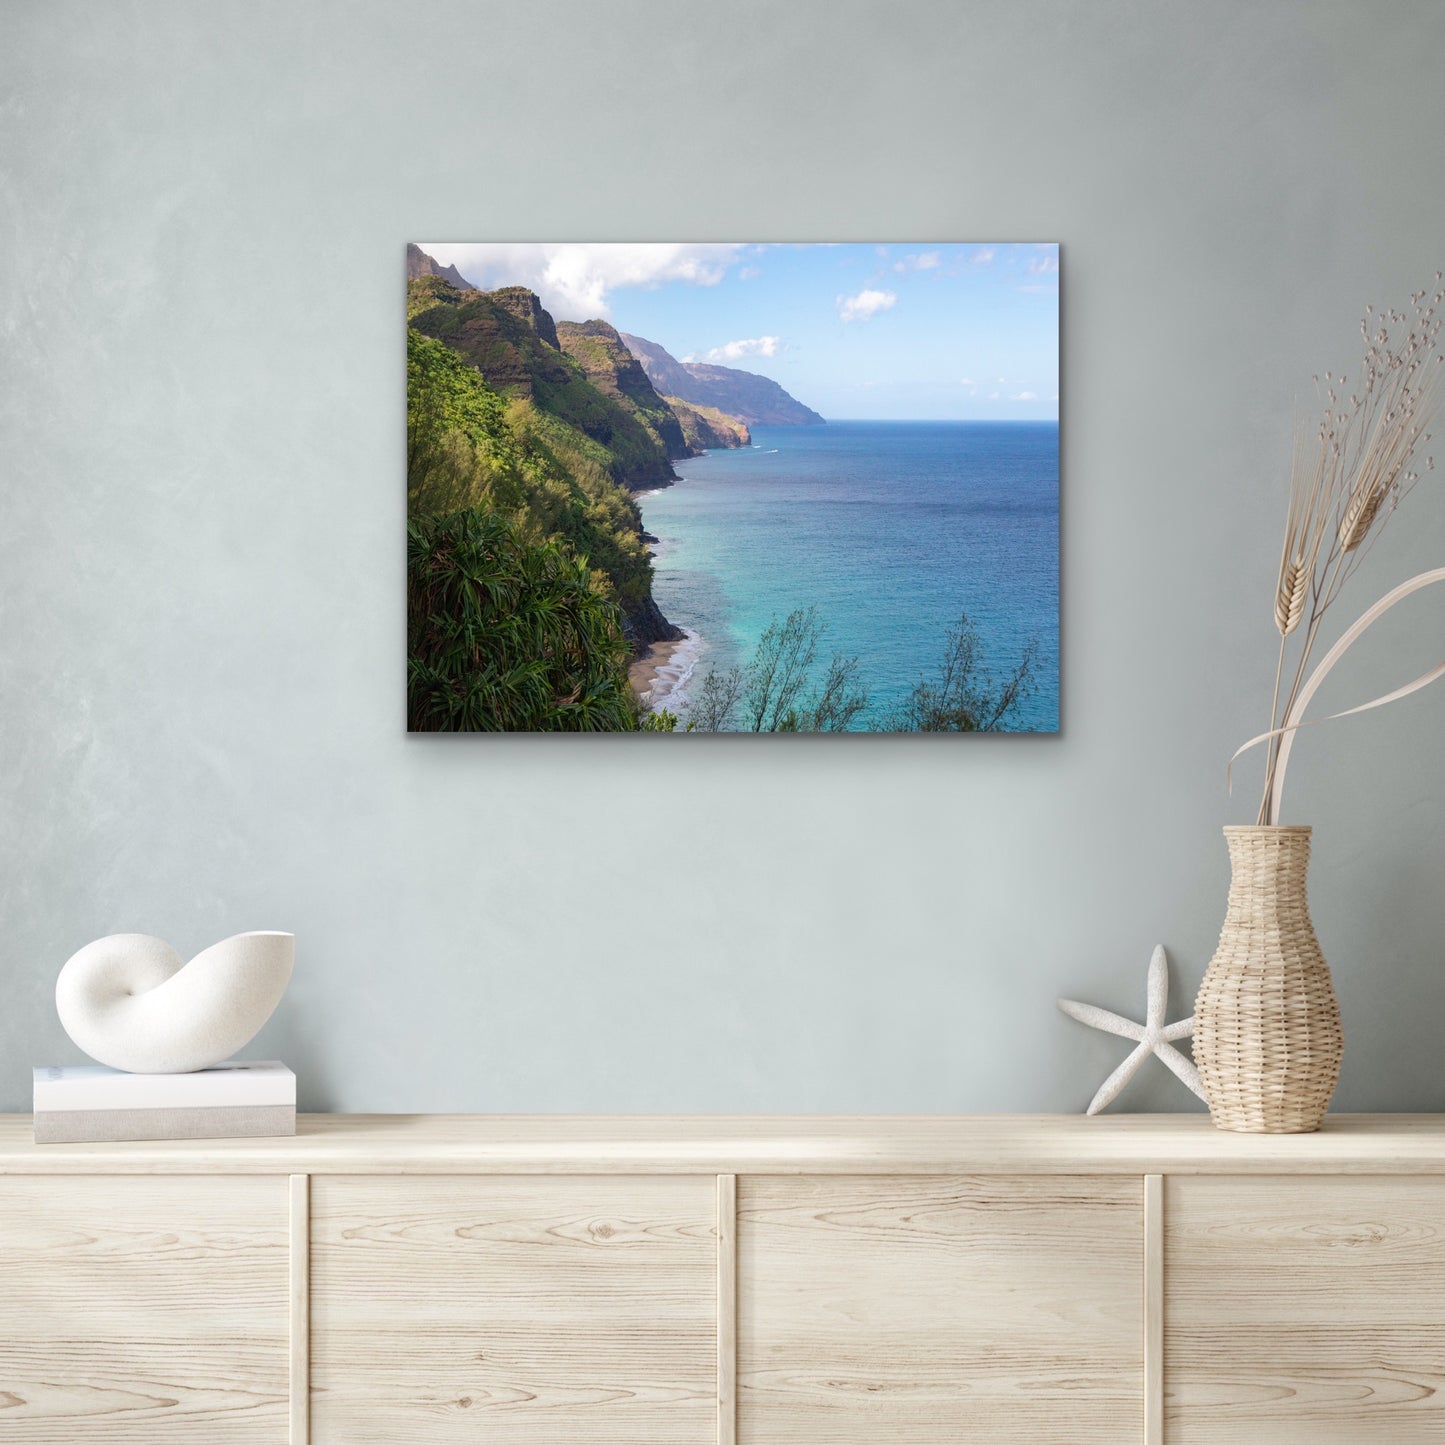 Wall demo of Hanakapi’ai View- a fine art photograph of the view of Kauai’s Napali Coast from the famed trail. Landscape photography by Inspiring Images Hawaii. 